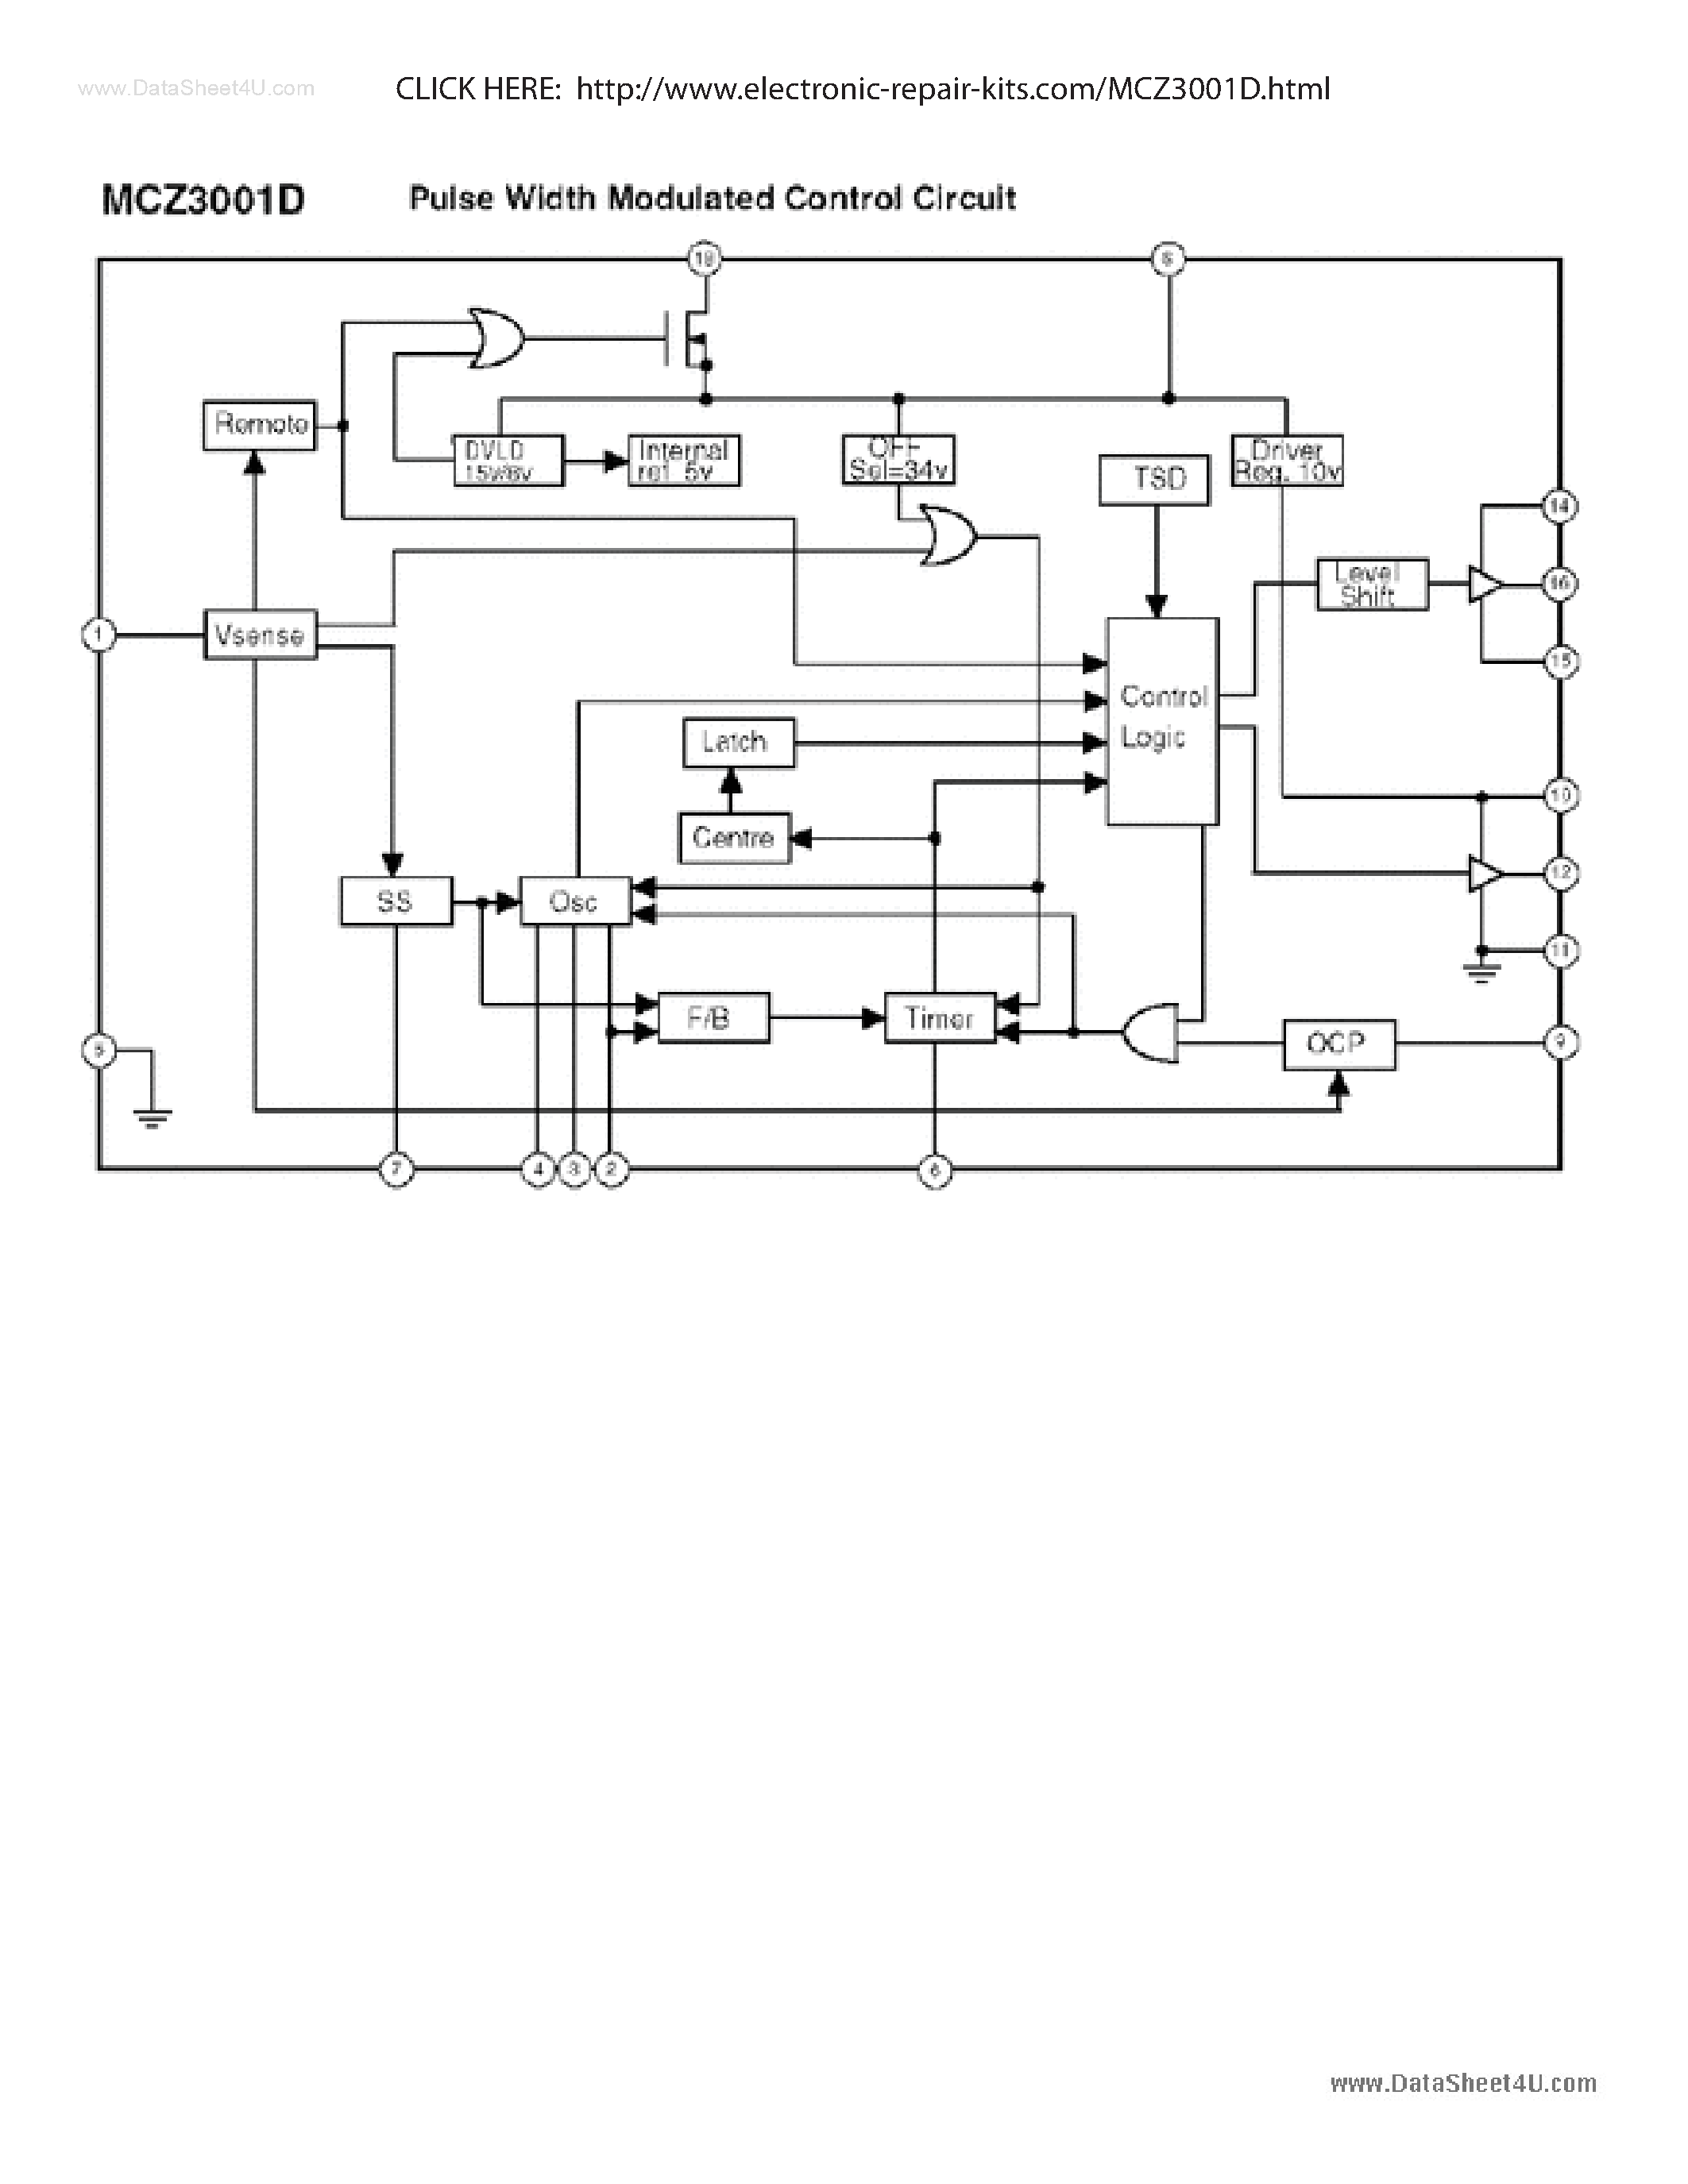 Datasheet MCZ3001D - Pulse Width Modulated Control Circuit page 1